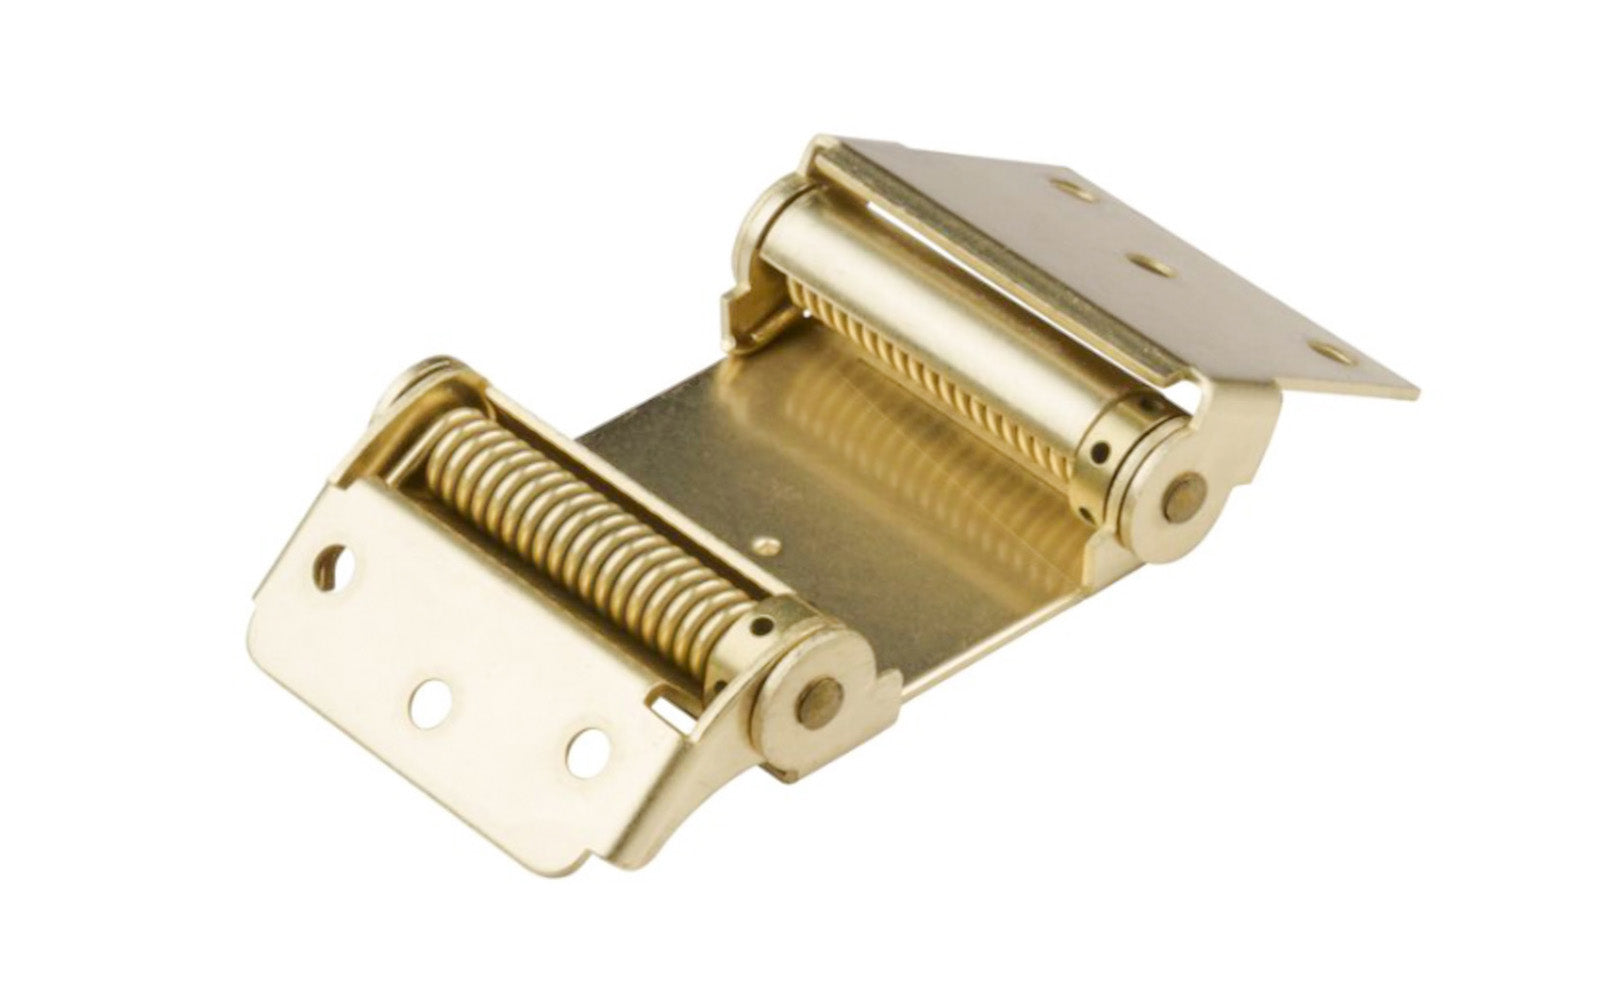 This 3" Double-Action Spring Hinge provides two way access for swinging doors. The tight pin is adjustable to provide desired closing speed for a variety of swinging-door applications. Brass Finish on steel material. Sold as a single hinge in pack.  National Hardware Model No. N100-049. 886780014327. 